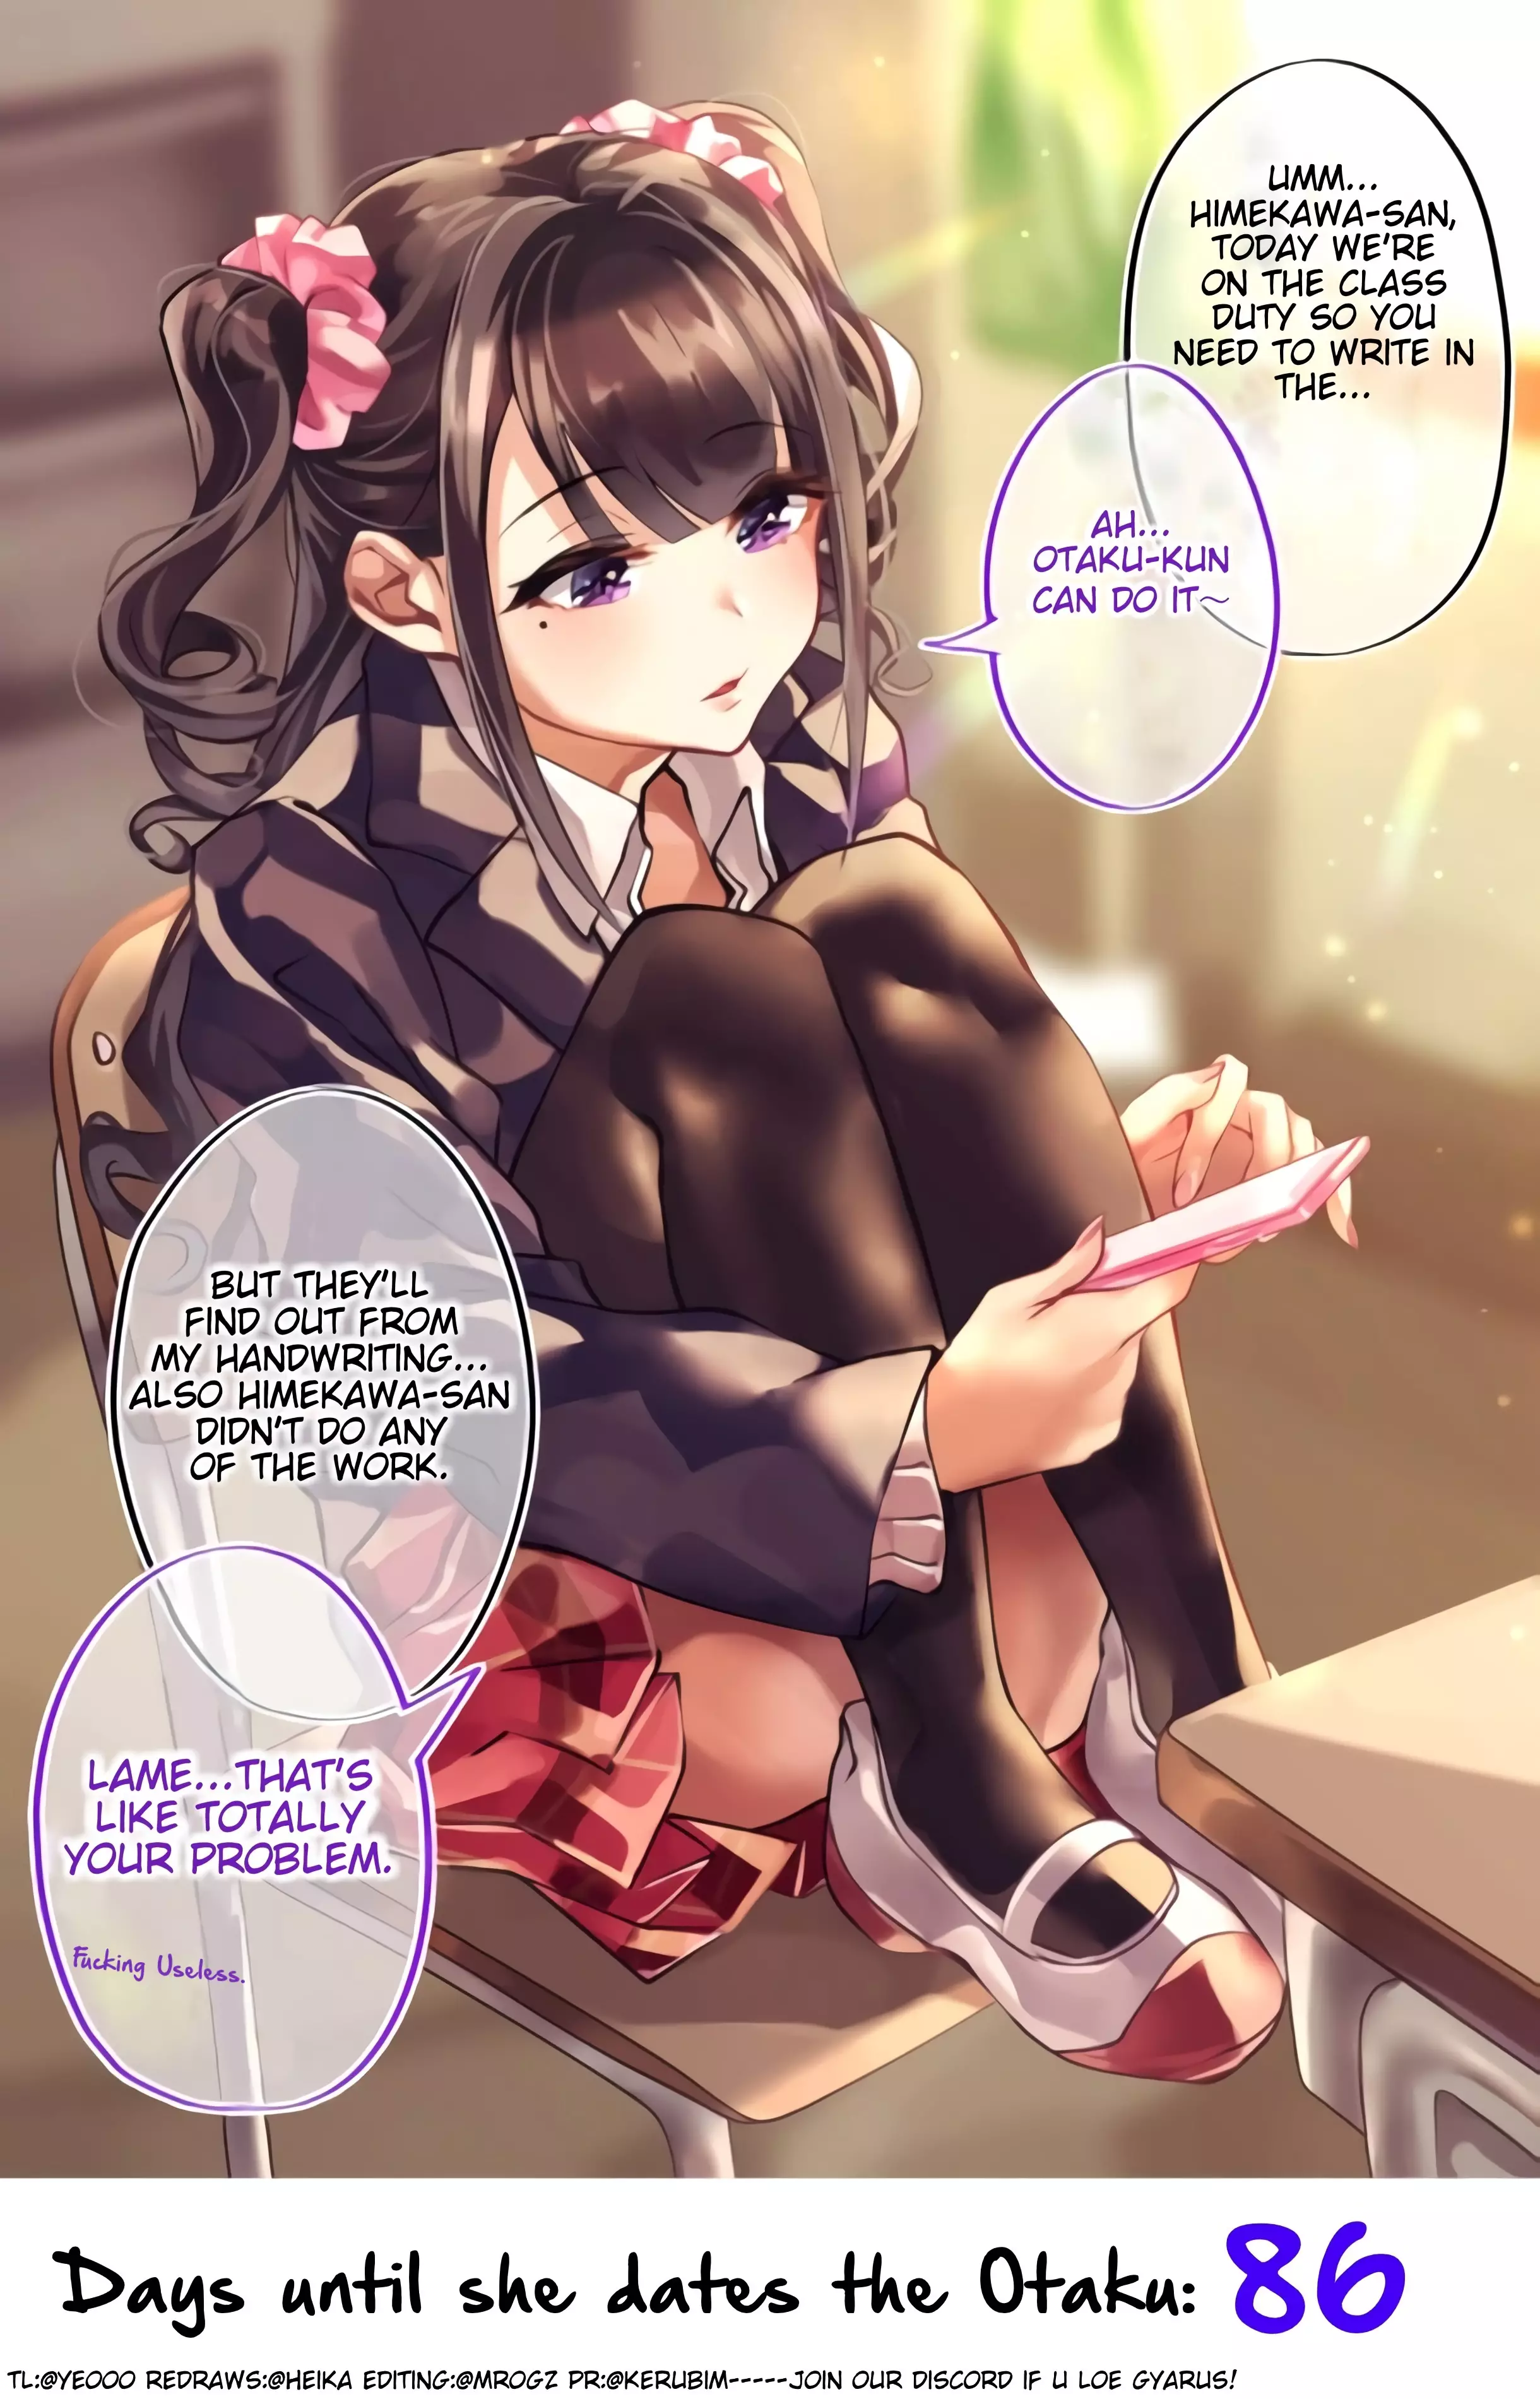 This Gyaru Will Date The Otaku In 100 Days - 14 page 1-c9d5ba14